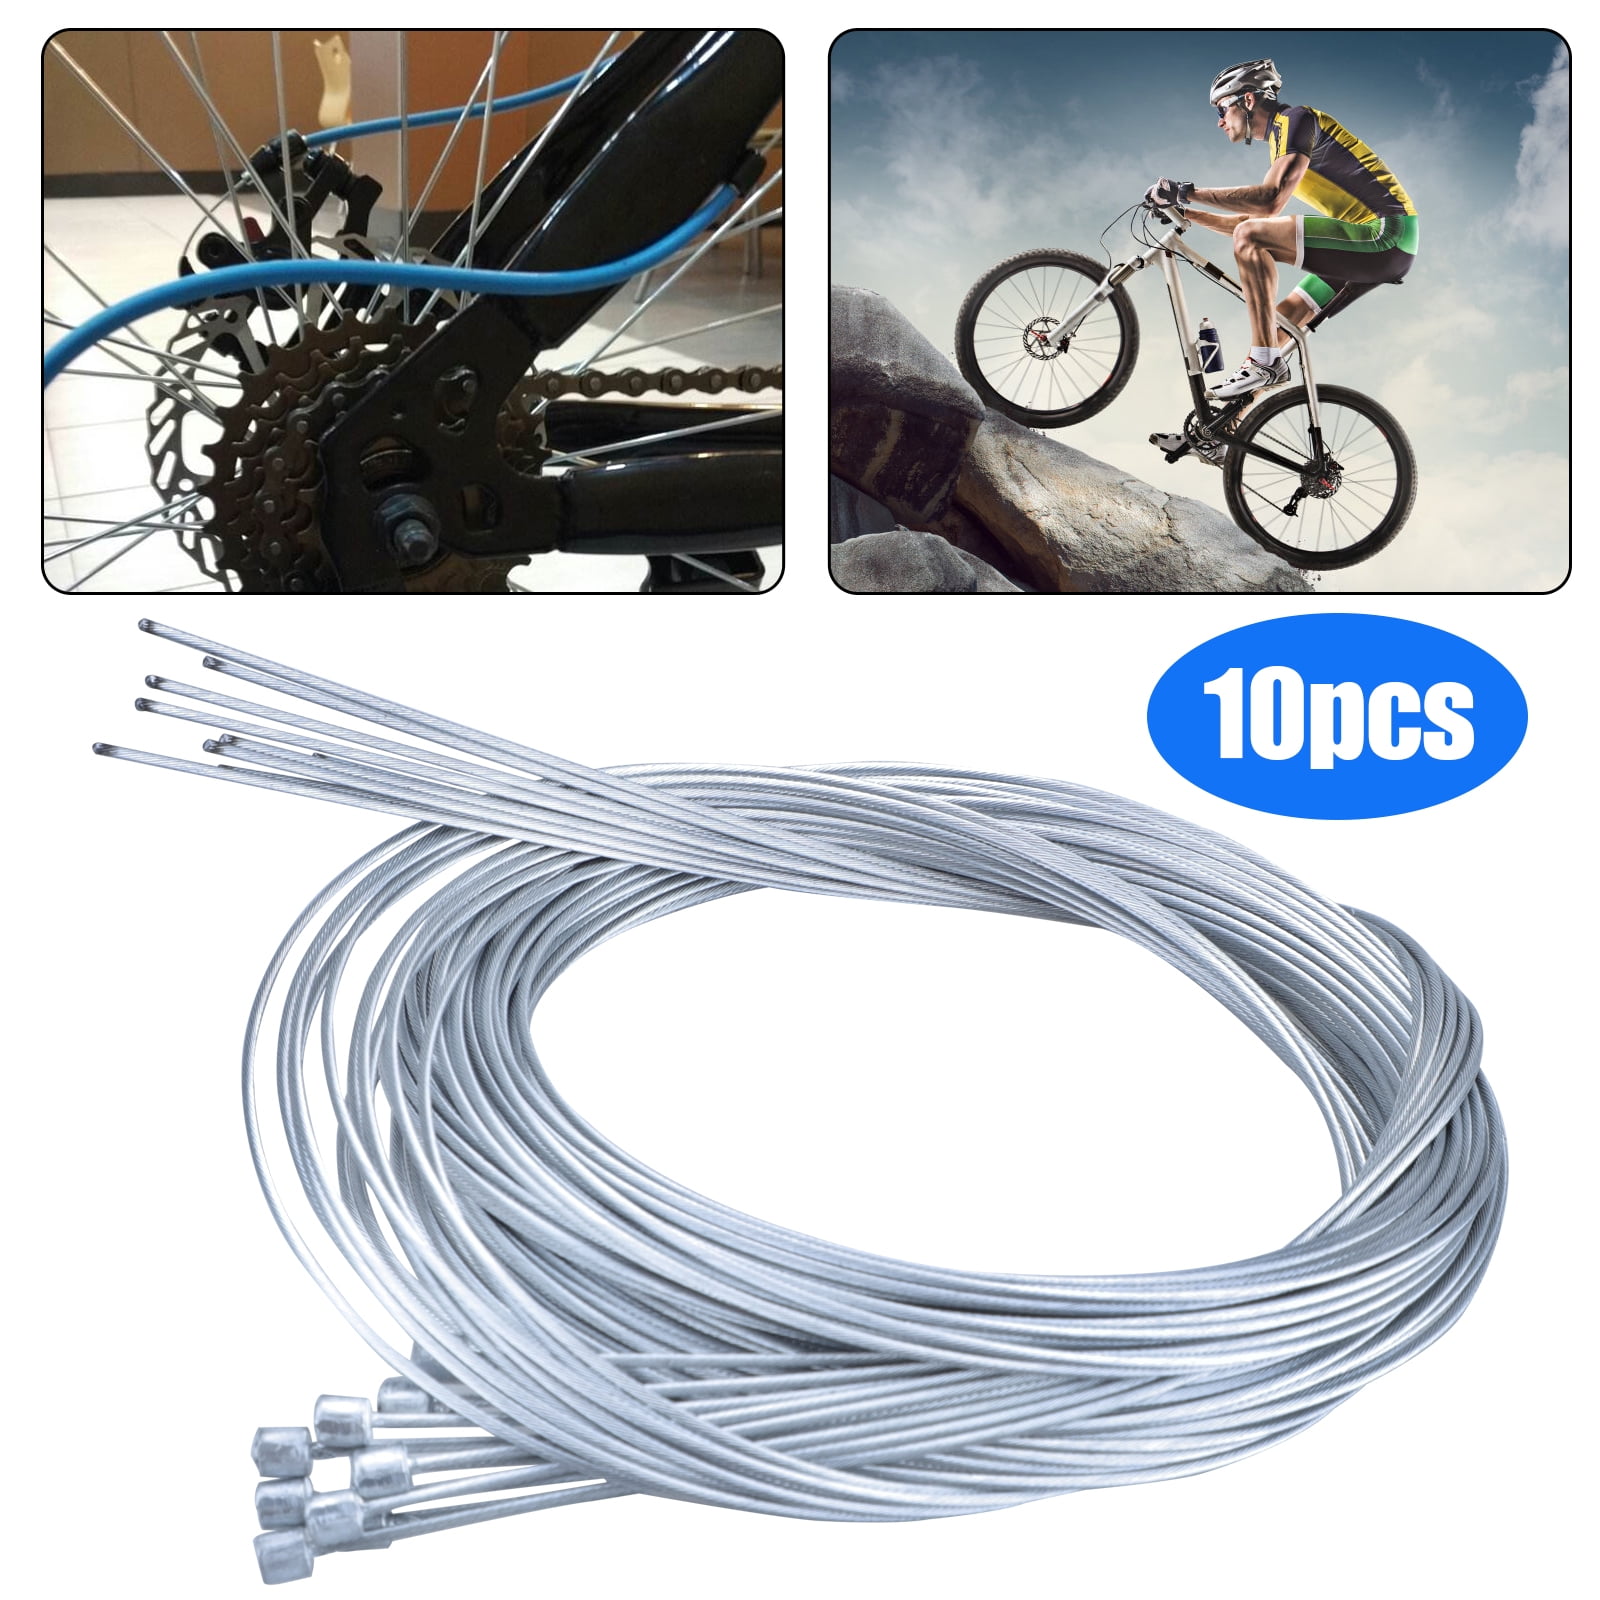 4mm/5mm Bicycle Brake Cables Derailleur Cable Bike Shifters Shift Cable Wire